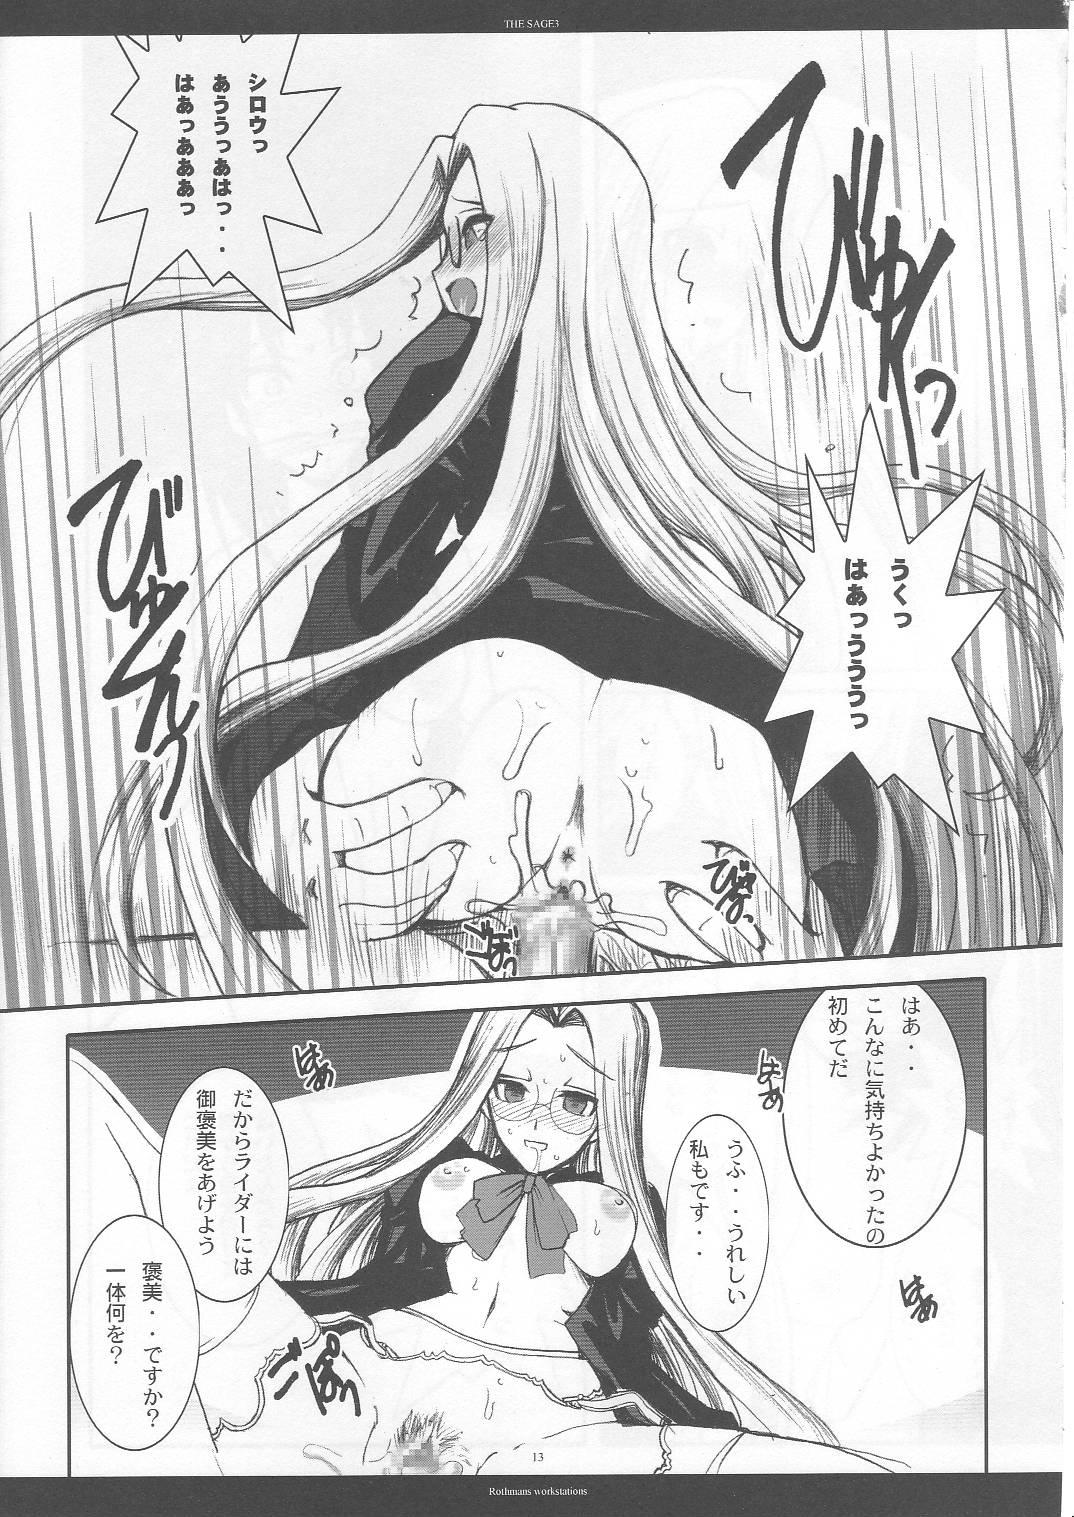 Huge Boobs THE SAGE 3 - Fate stay night Monstercock - Page 12